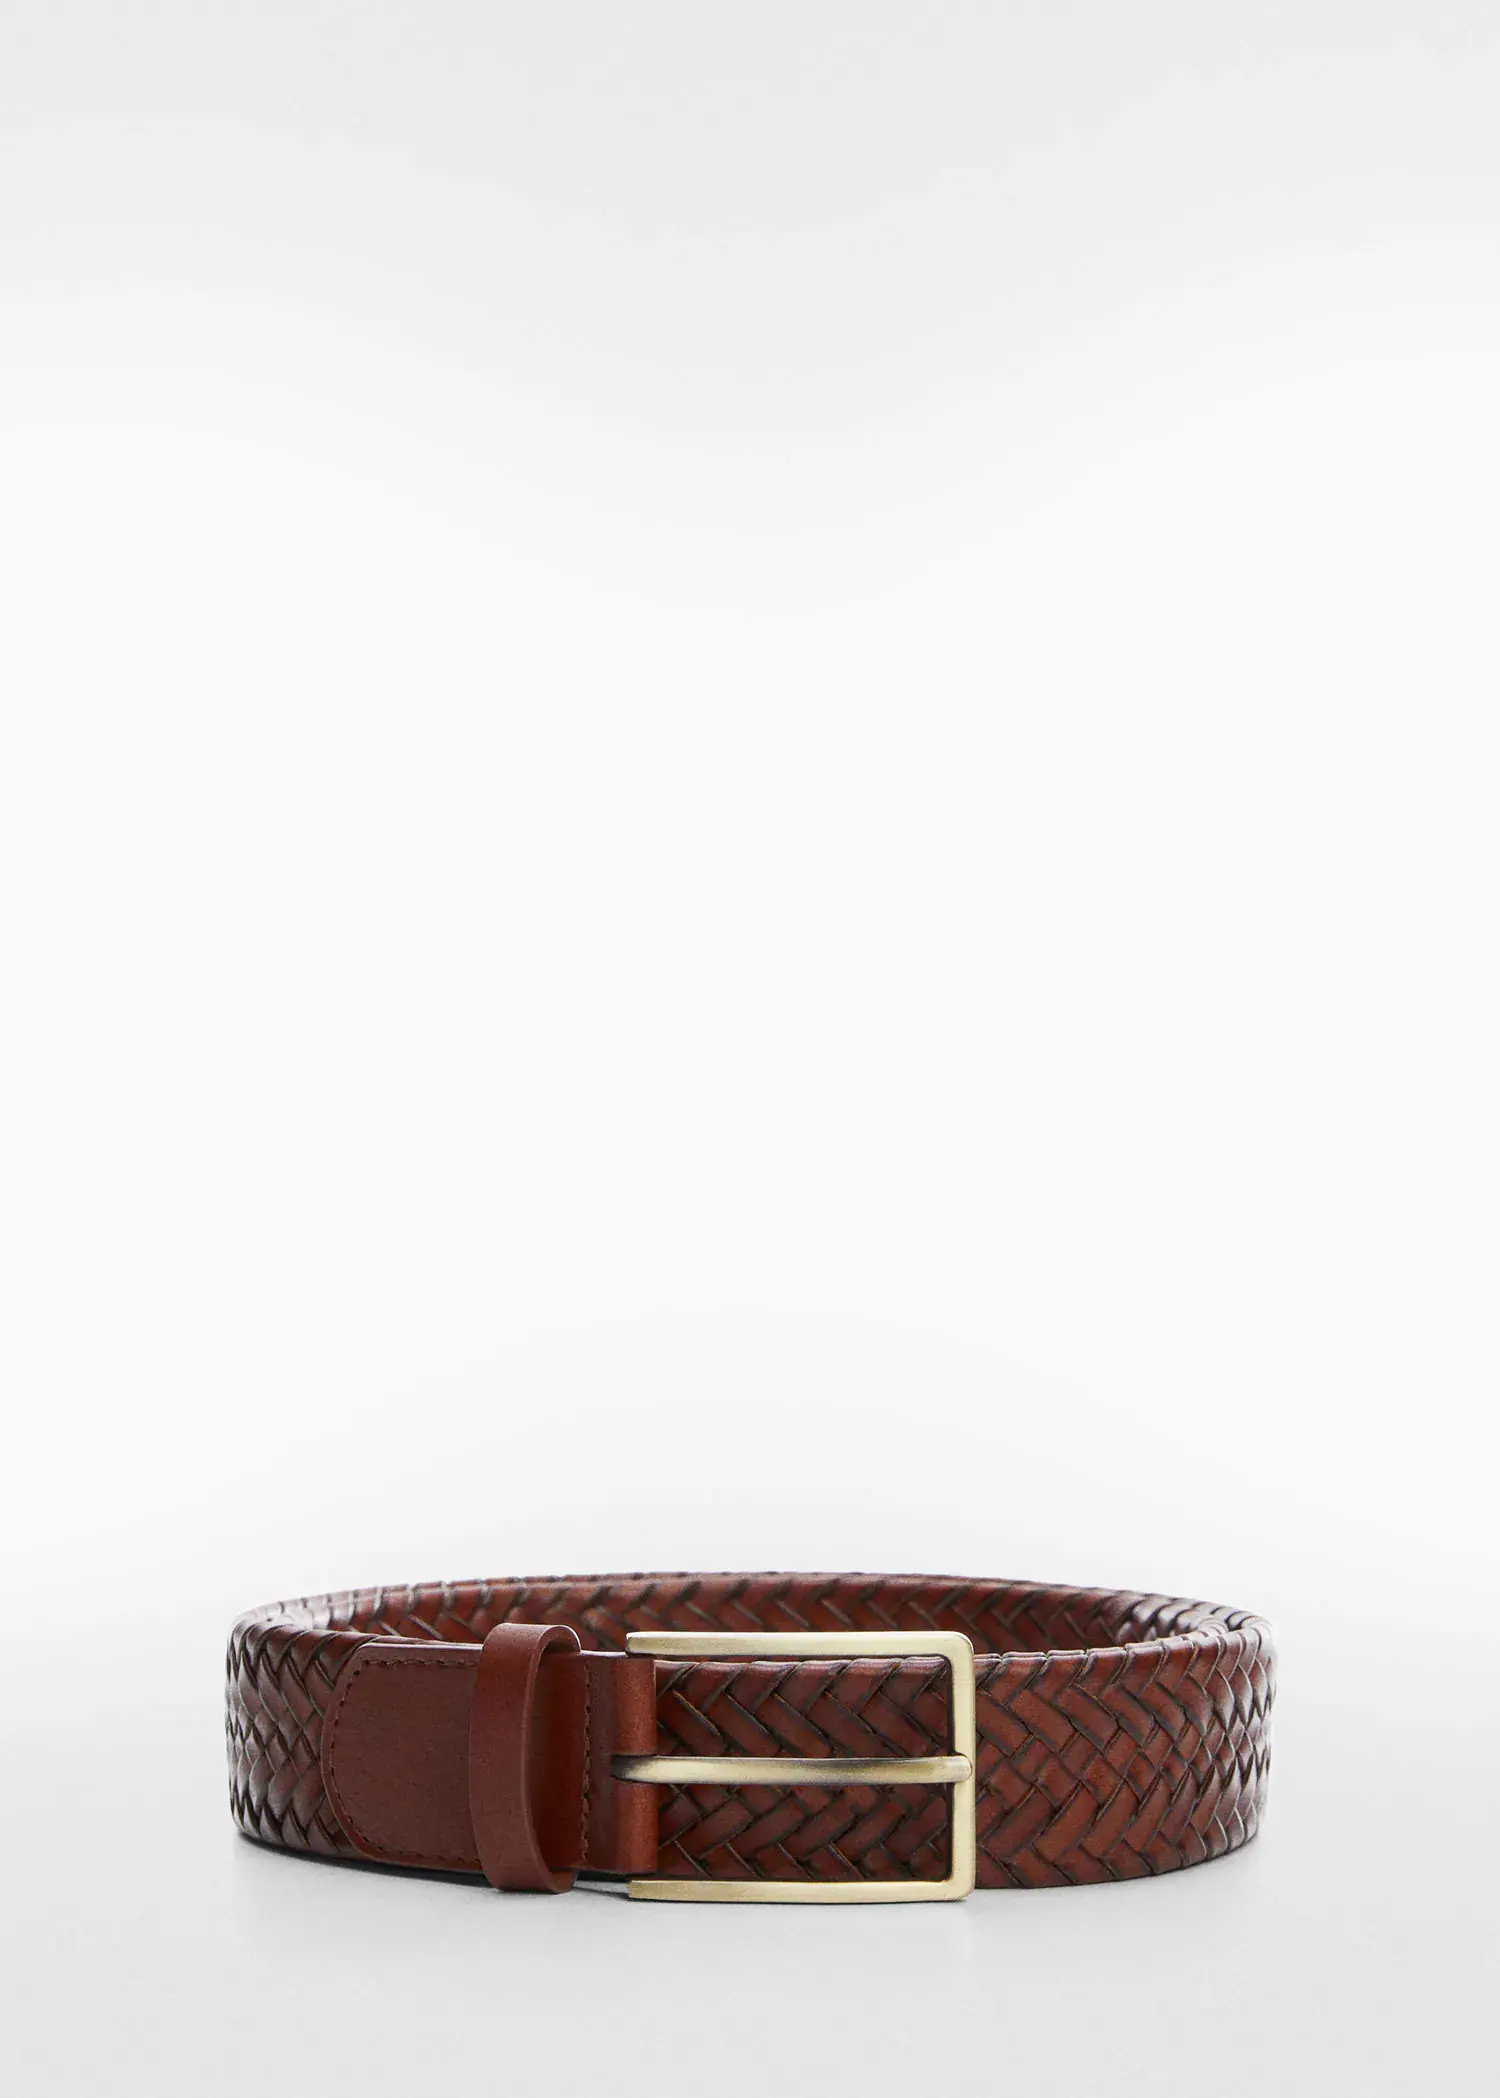 Mango Braided leather belt. a close up of a belt on a white background 